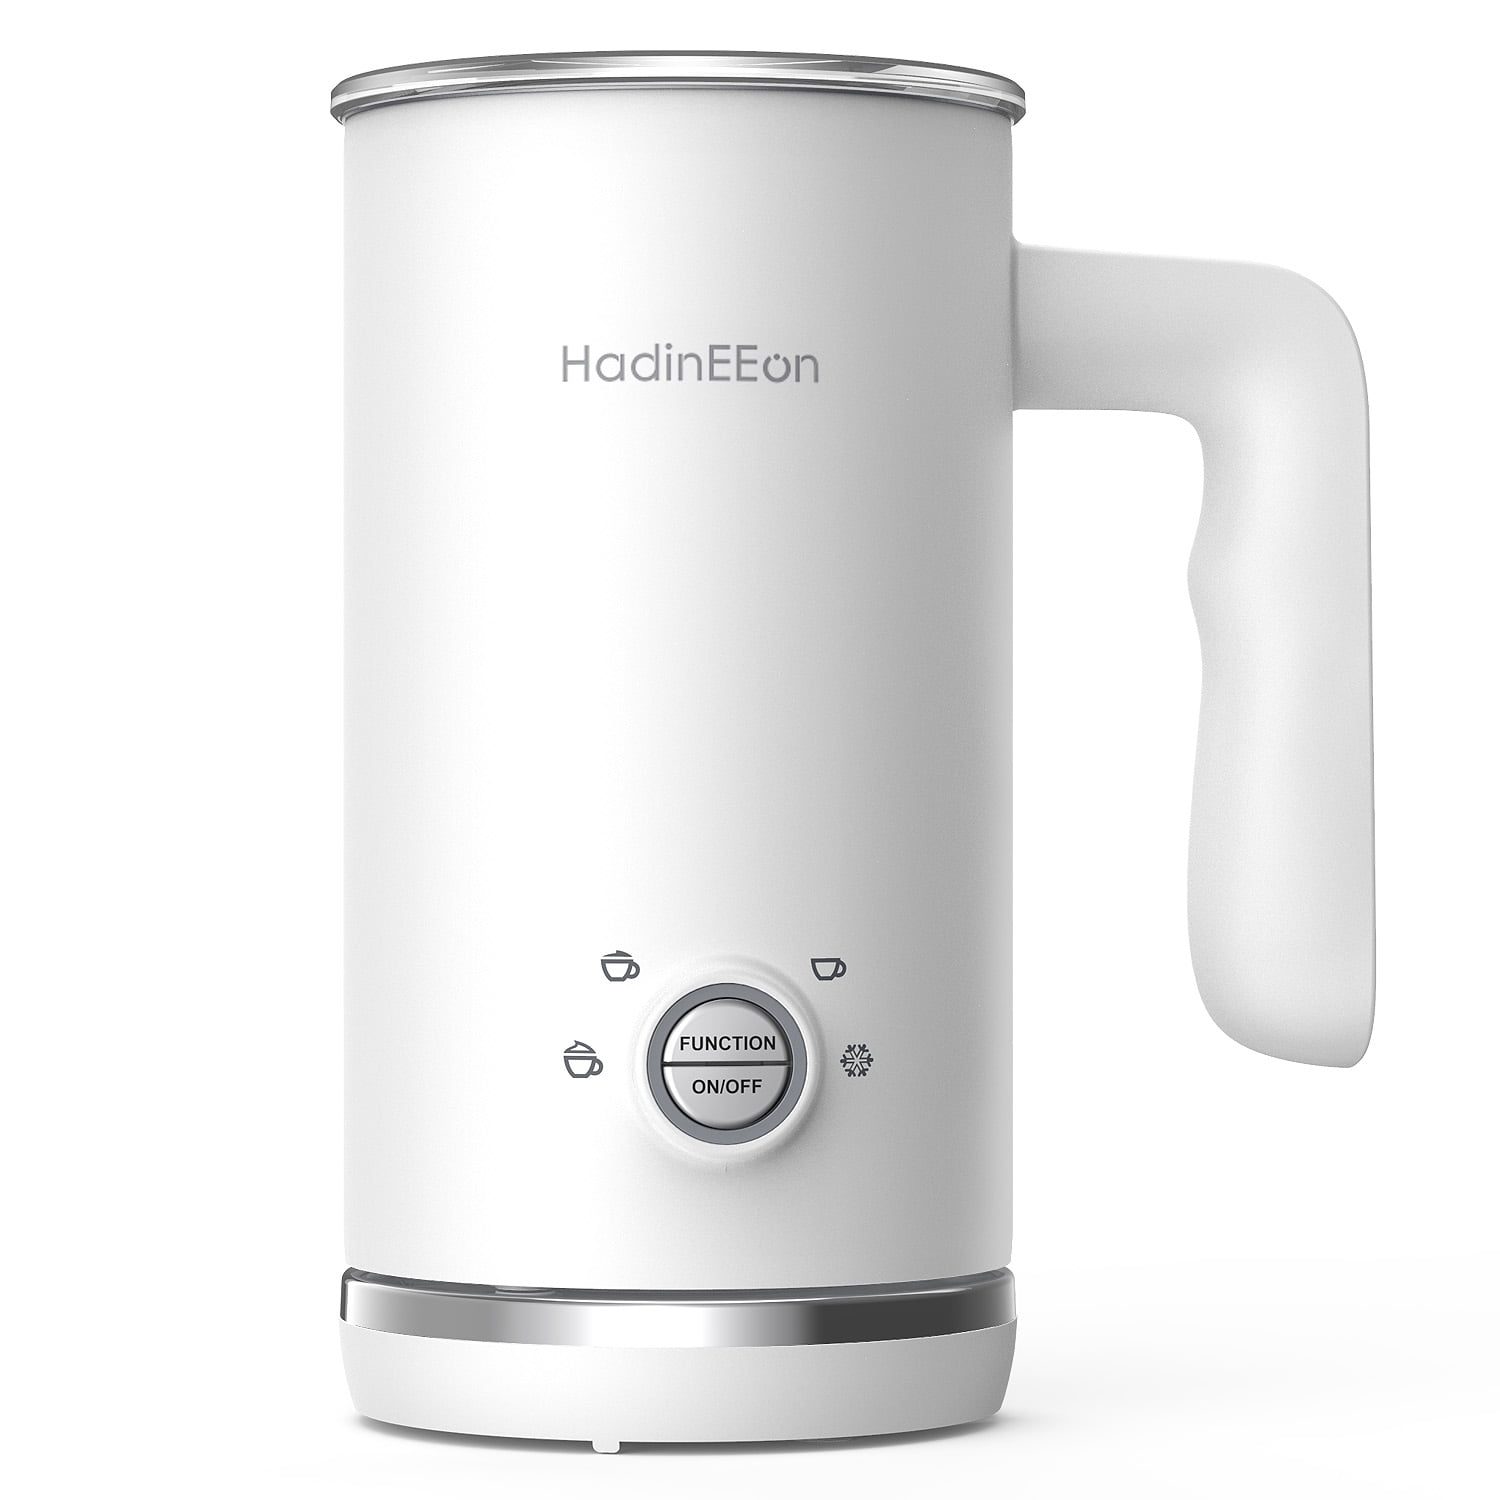 HadinEEon Milk Frother, 4-in-1 Electric Milk Frother and Steamer (5.1  oz/10.1 oz), Automatic Milk Frother Foam Maker, Coffee Frother for Latte